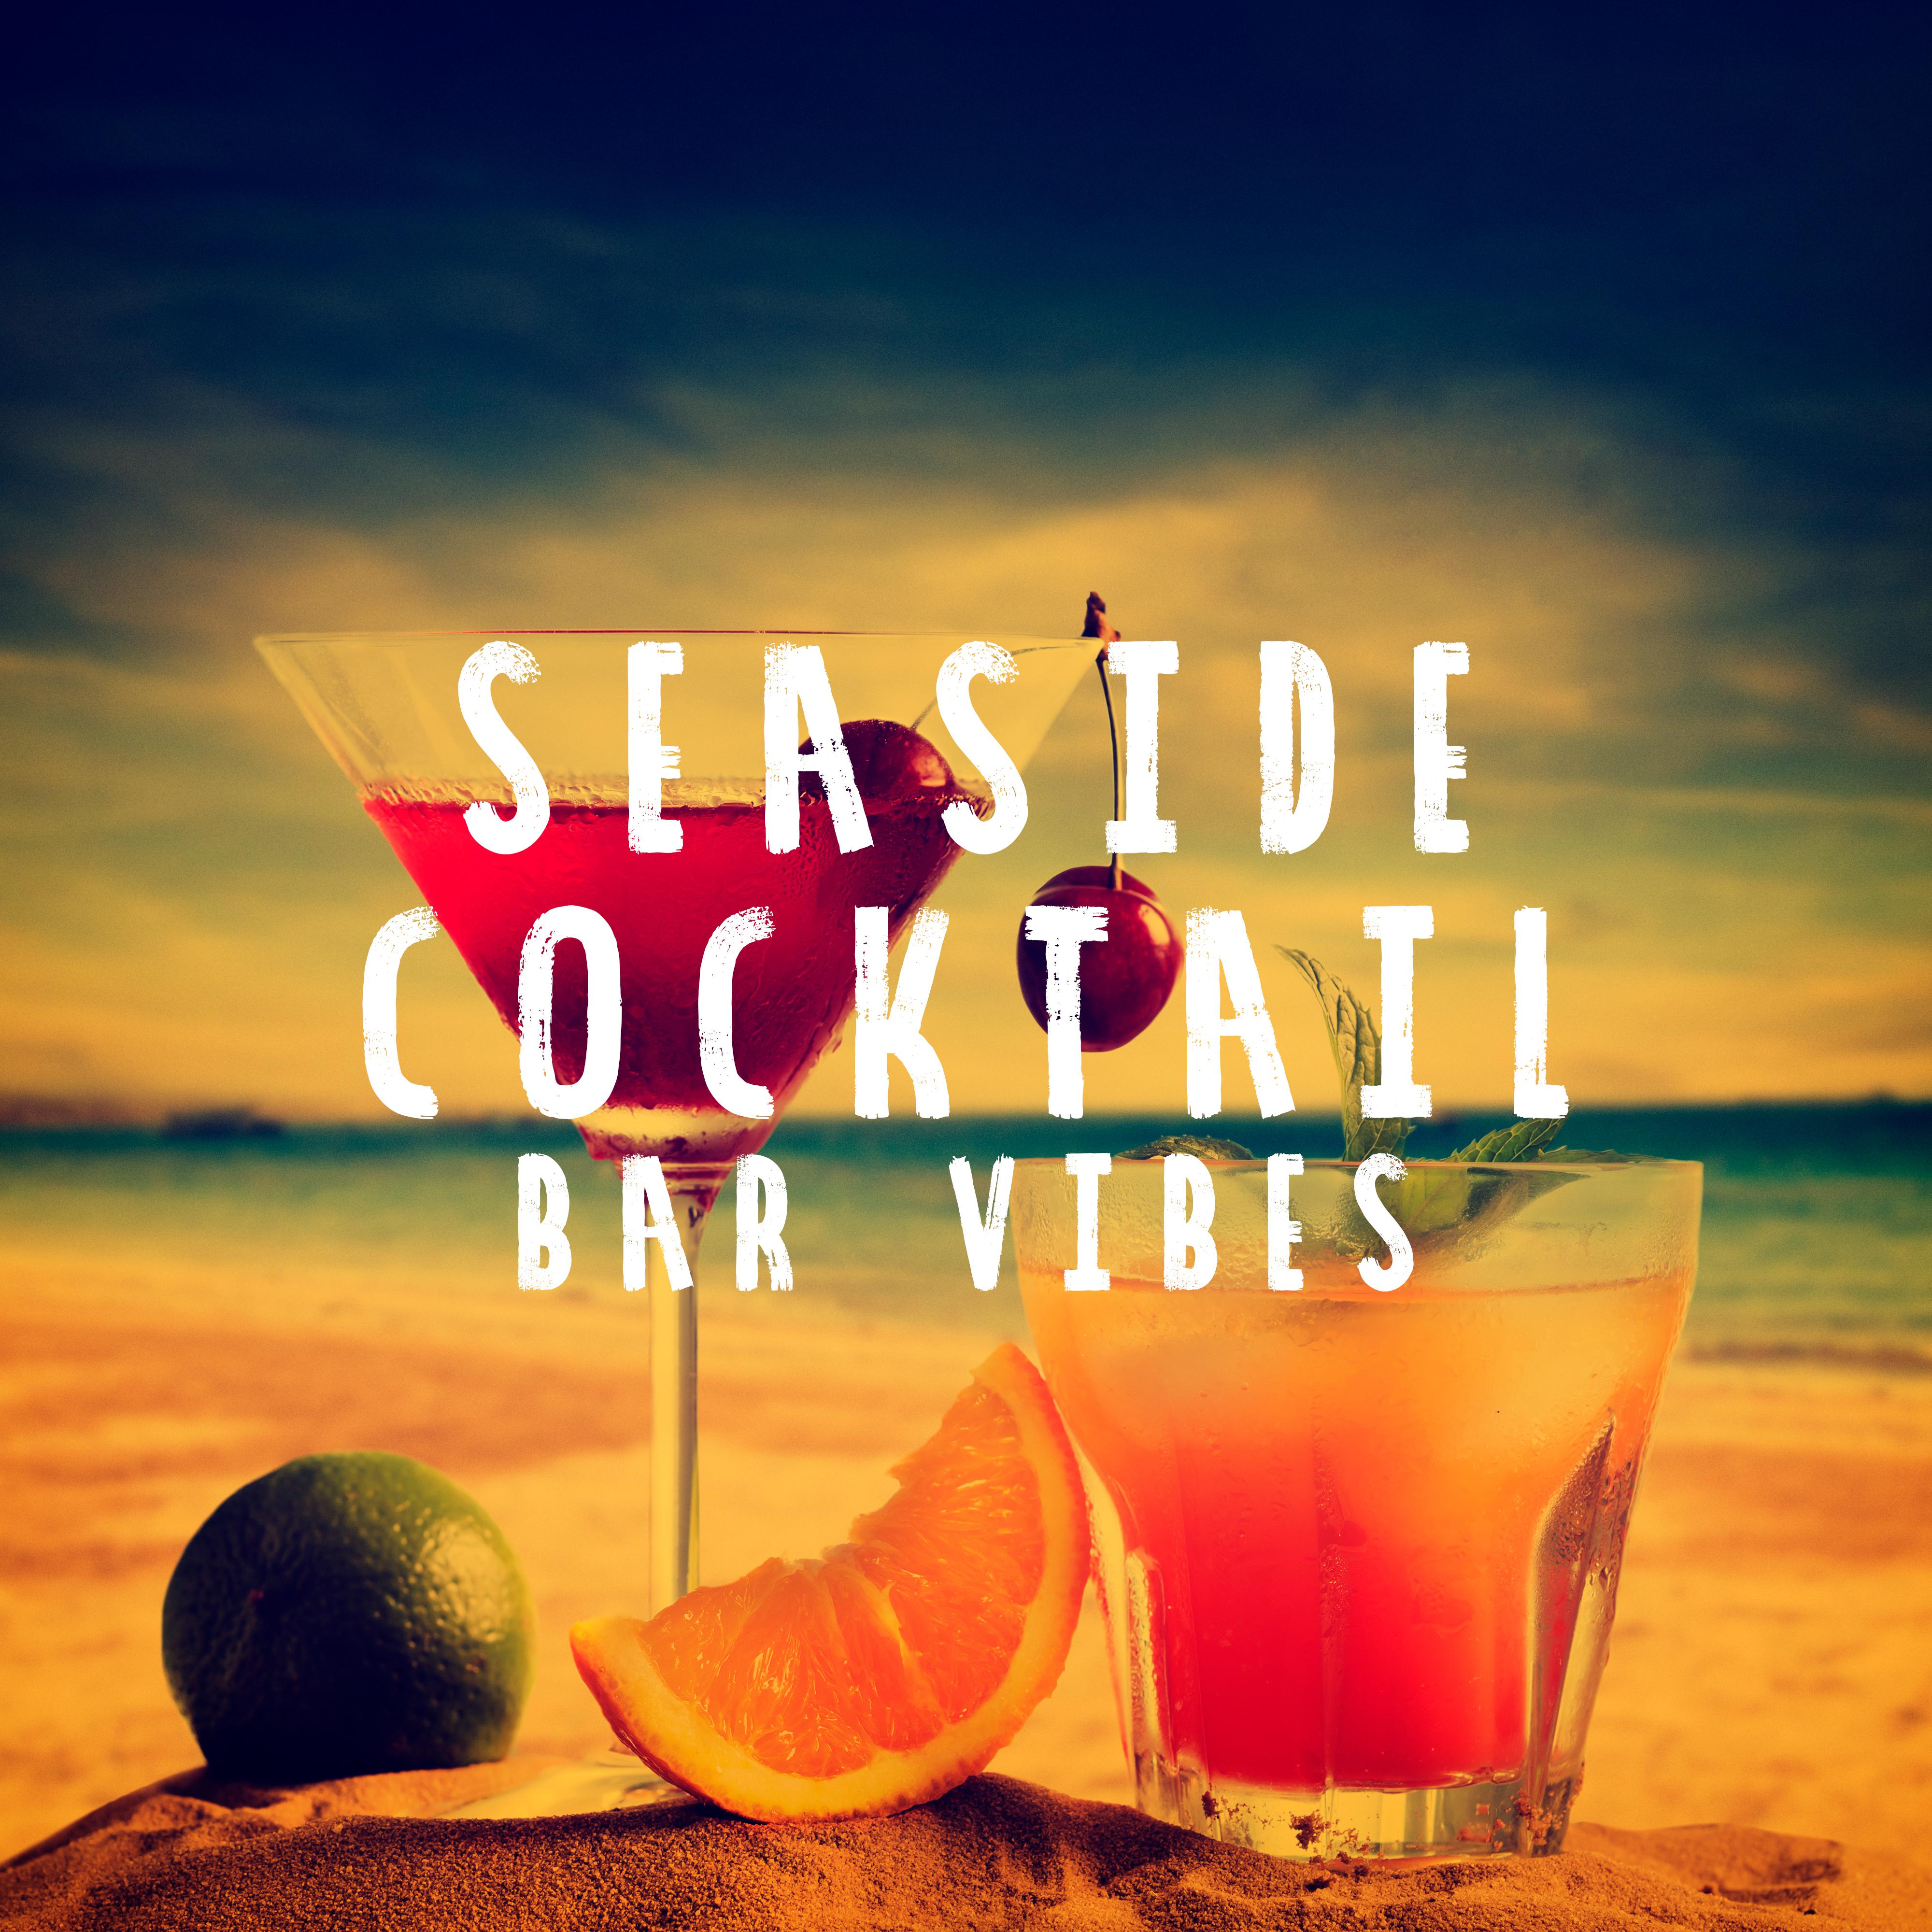 Seaside Cocktail Bar Vibes - Chillout Edition of The Best Songs for the Summer 2019